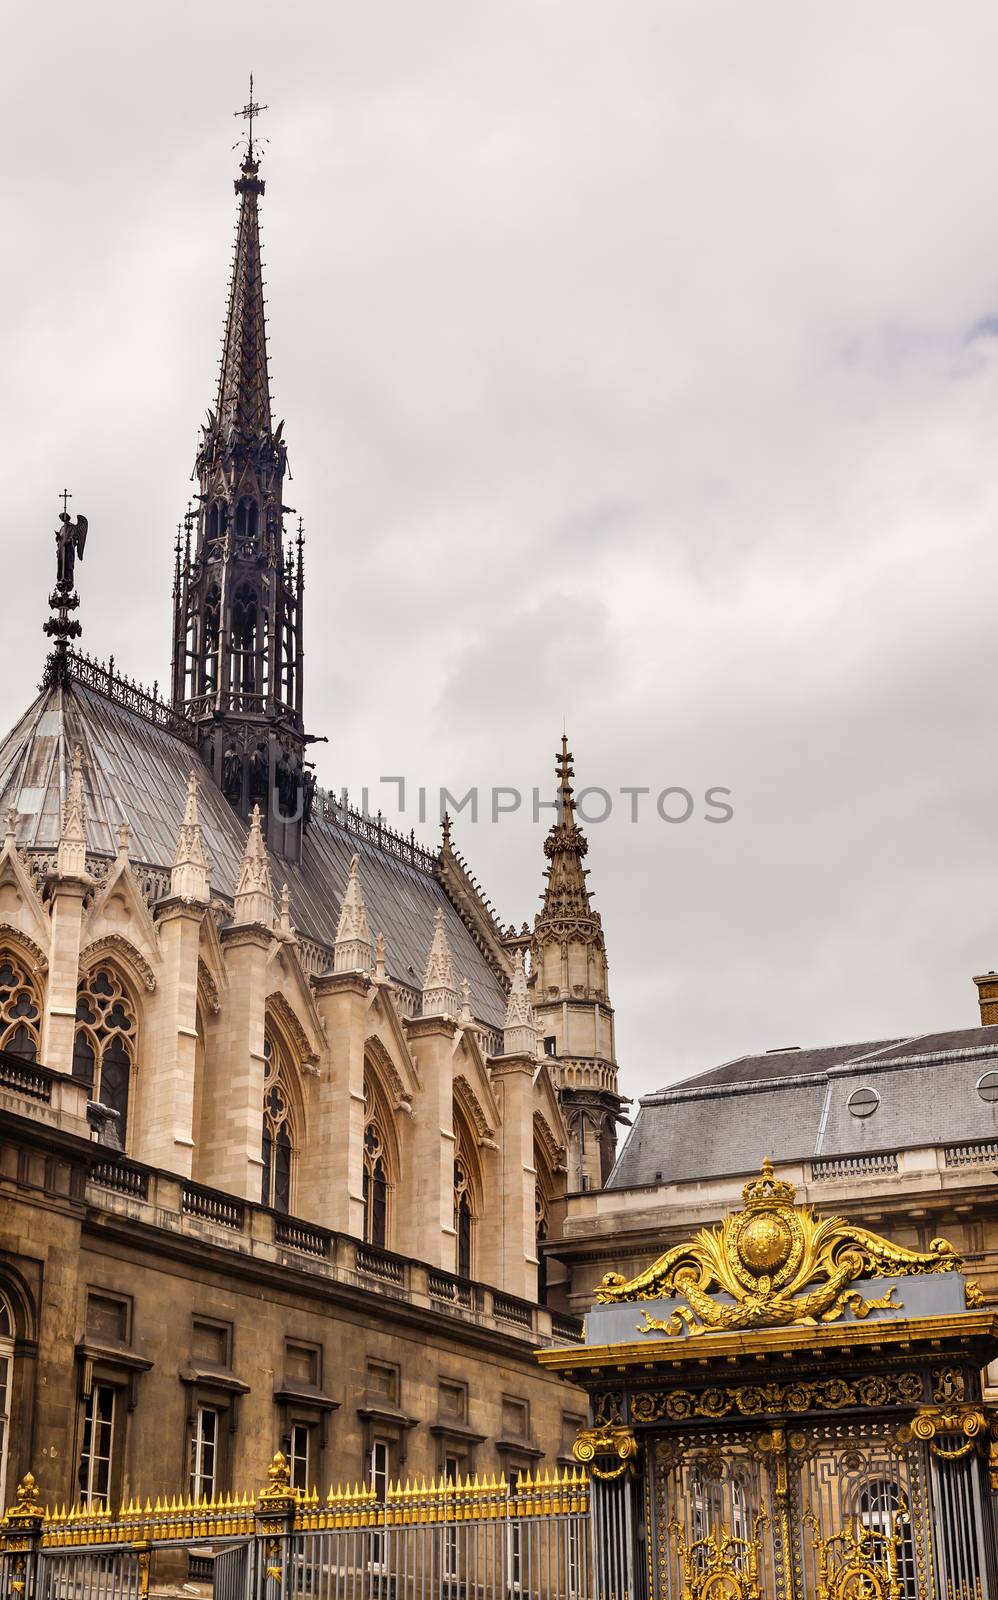 Cathedral Spires Sainte Chapelle Golden Gate Palace Justice Paris by bill_perry